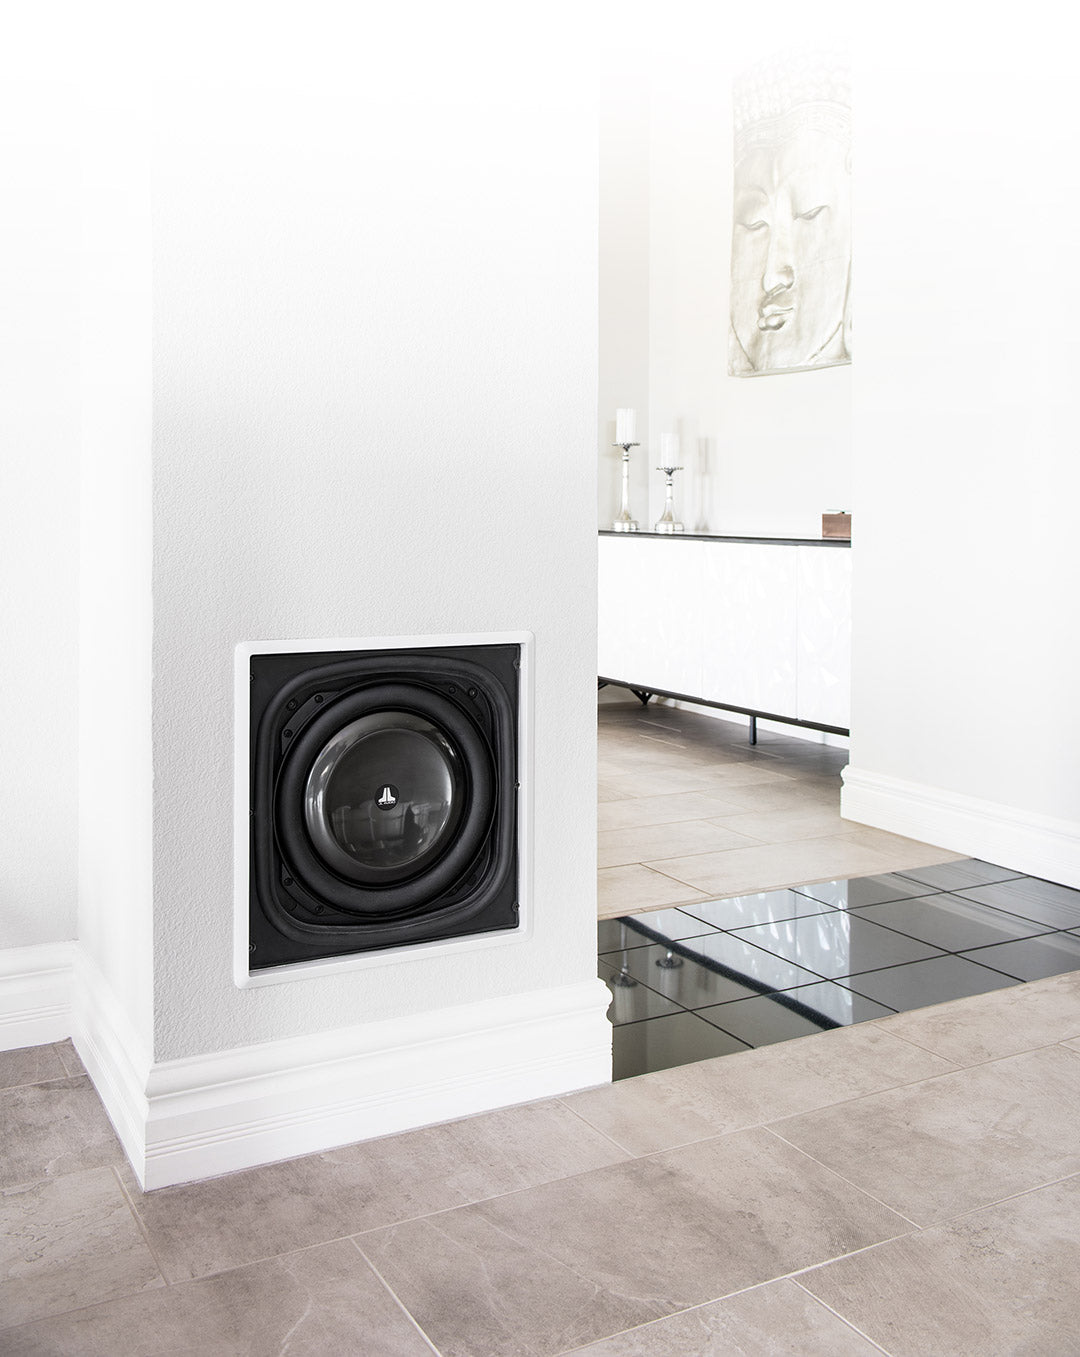 Fathom IWS 13 subwoofer in a home theatre setting.